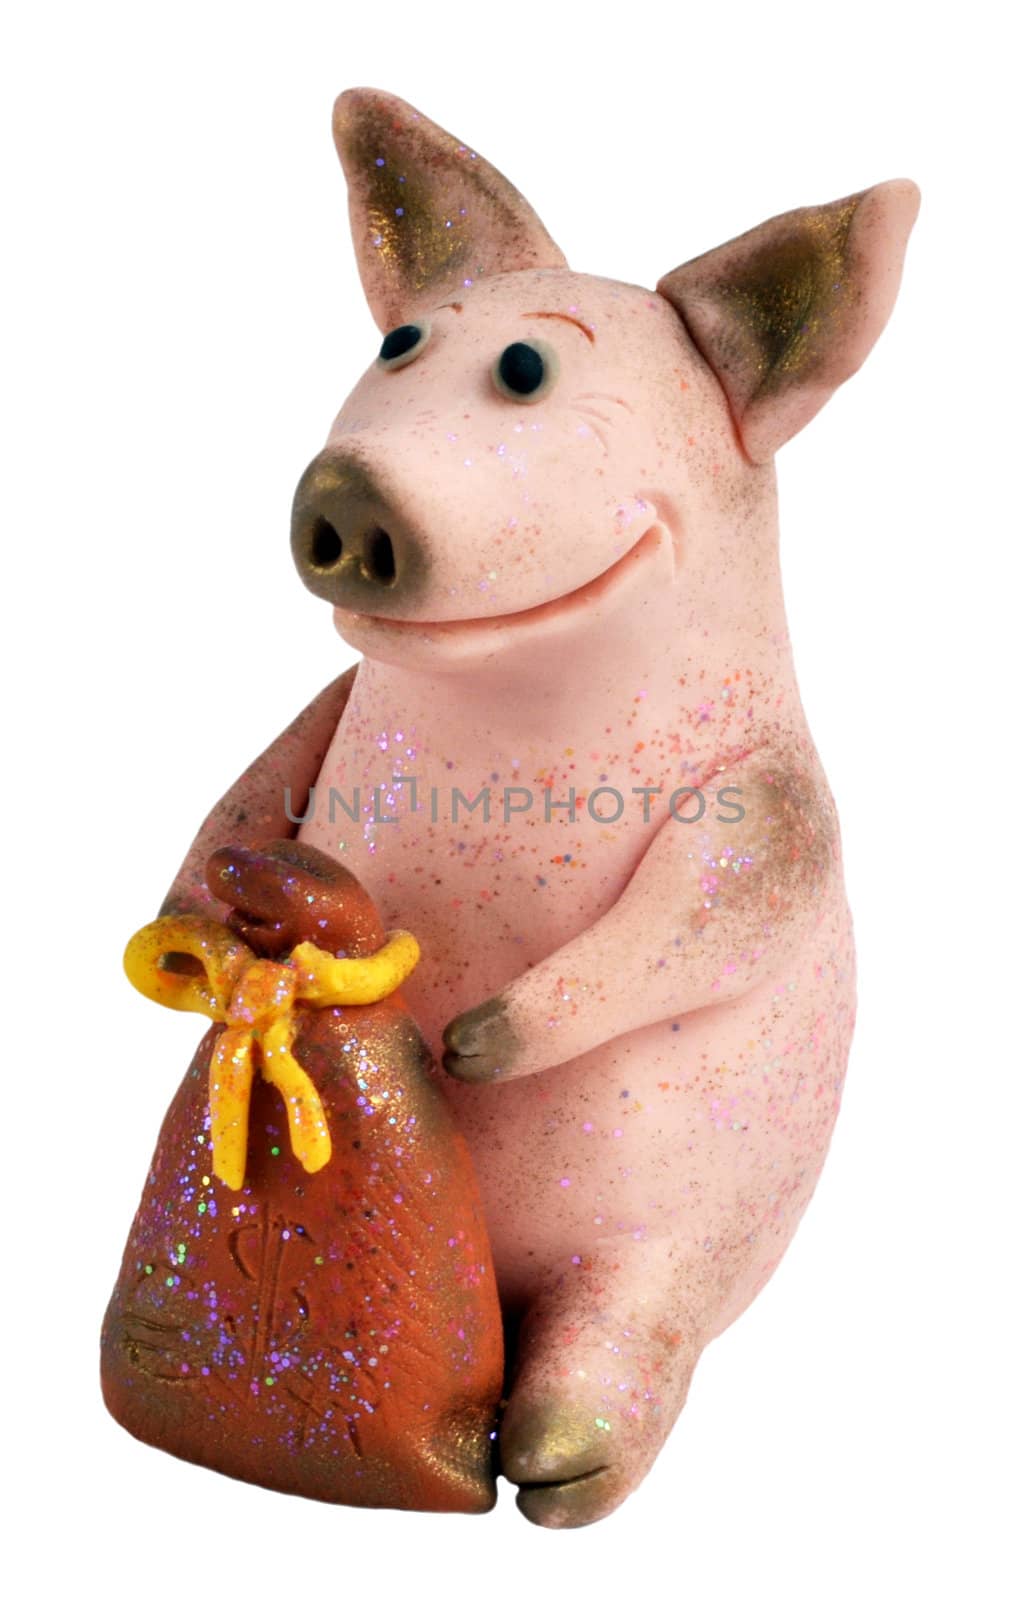 Handmade, toy from the salty test: a pig with a bag of money, a symbol of riches and Year of the Pig